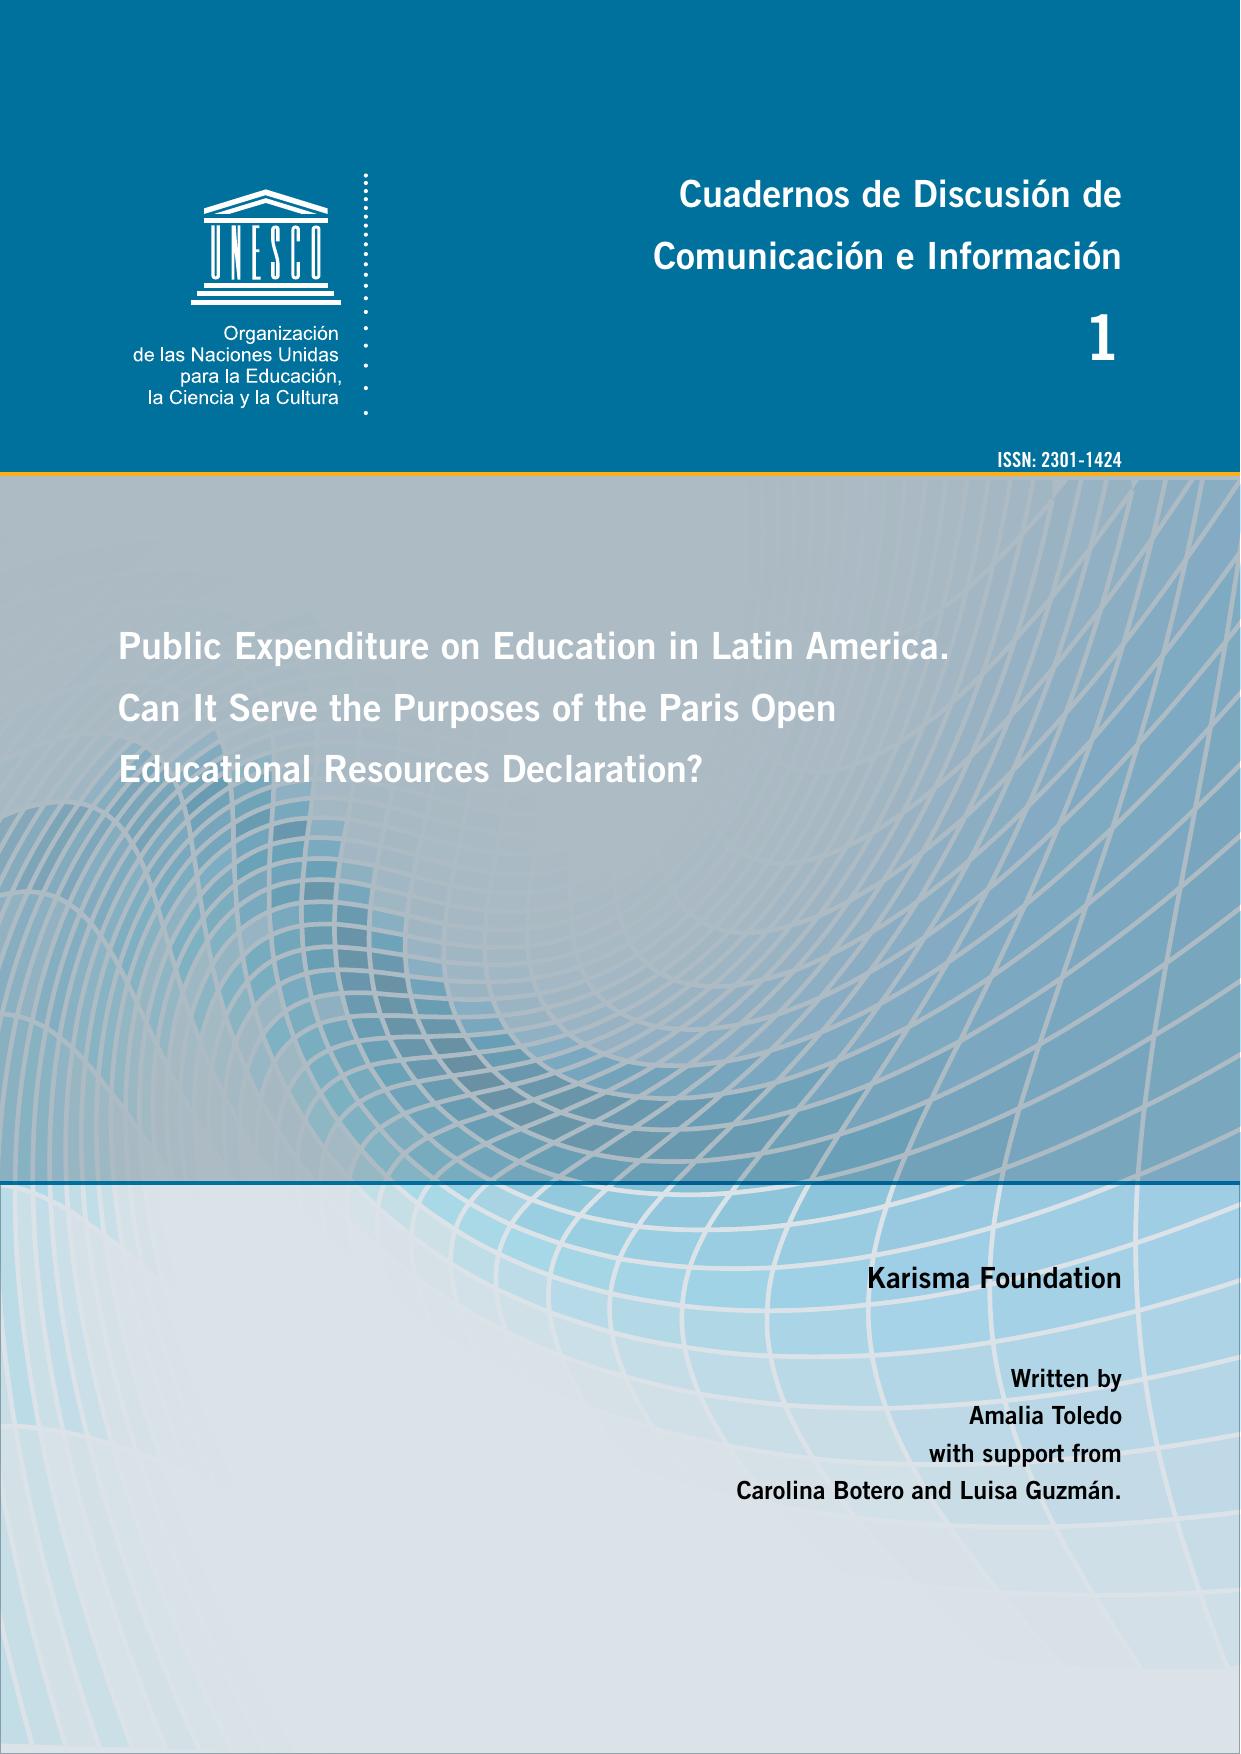 Public expenditure on education in Latin America: can it serve the purpose of the Paris Open Educational Resources Declaration?